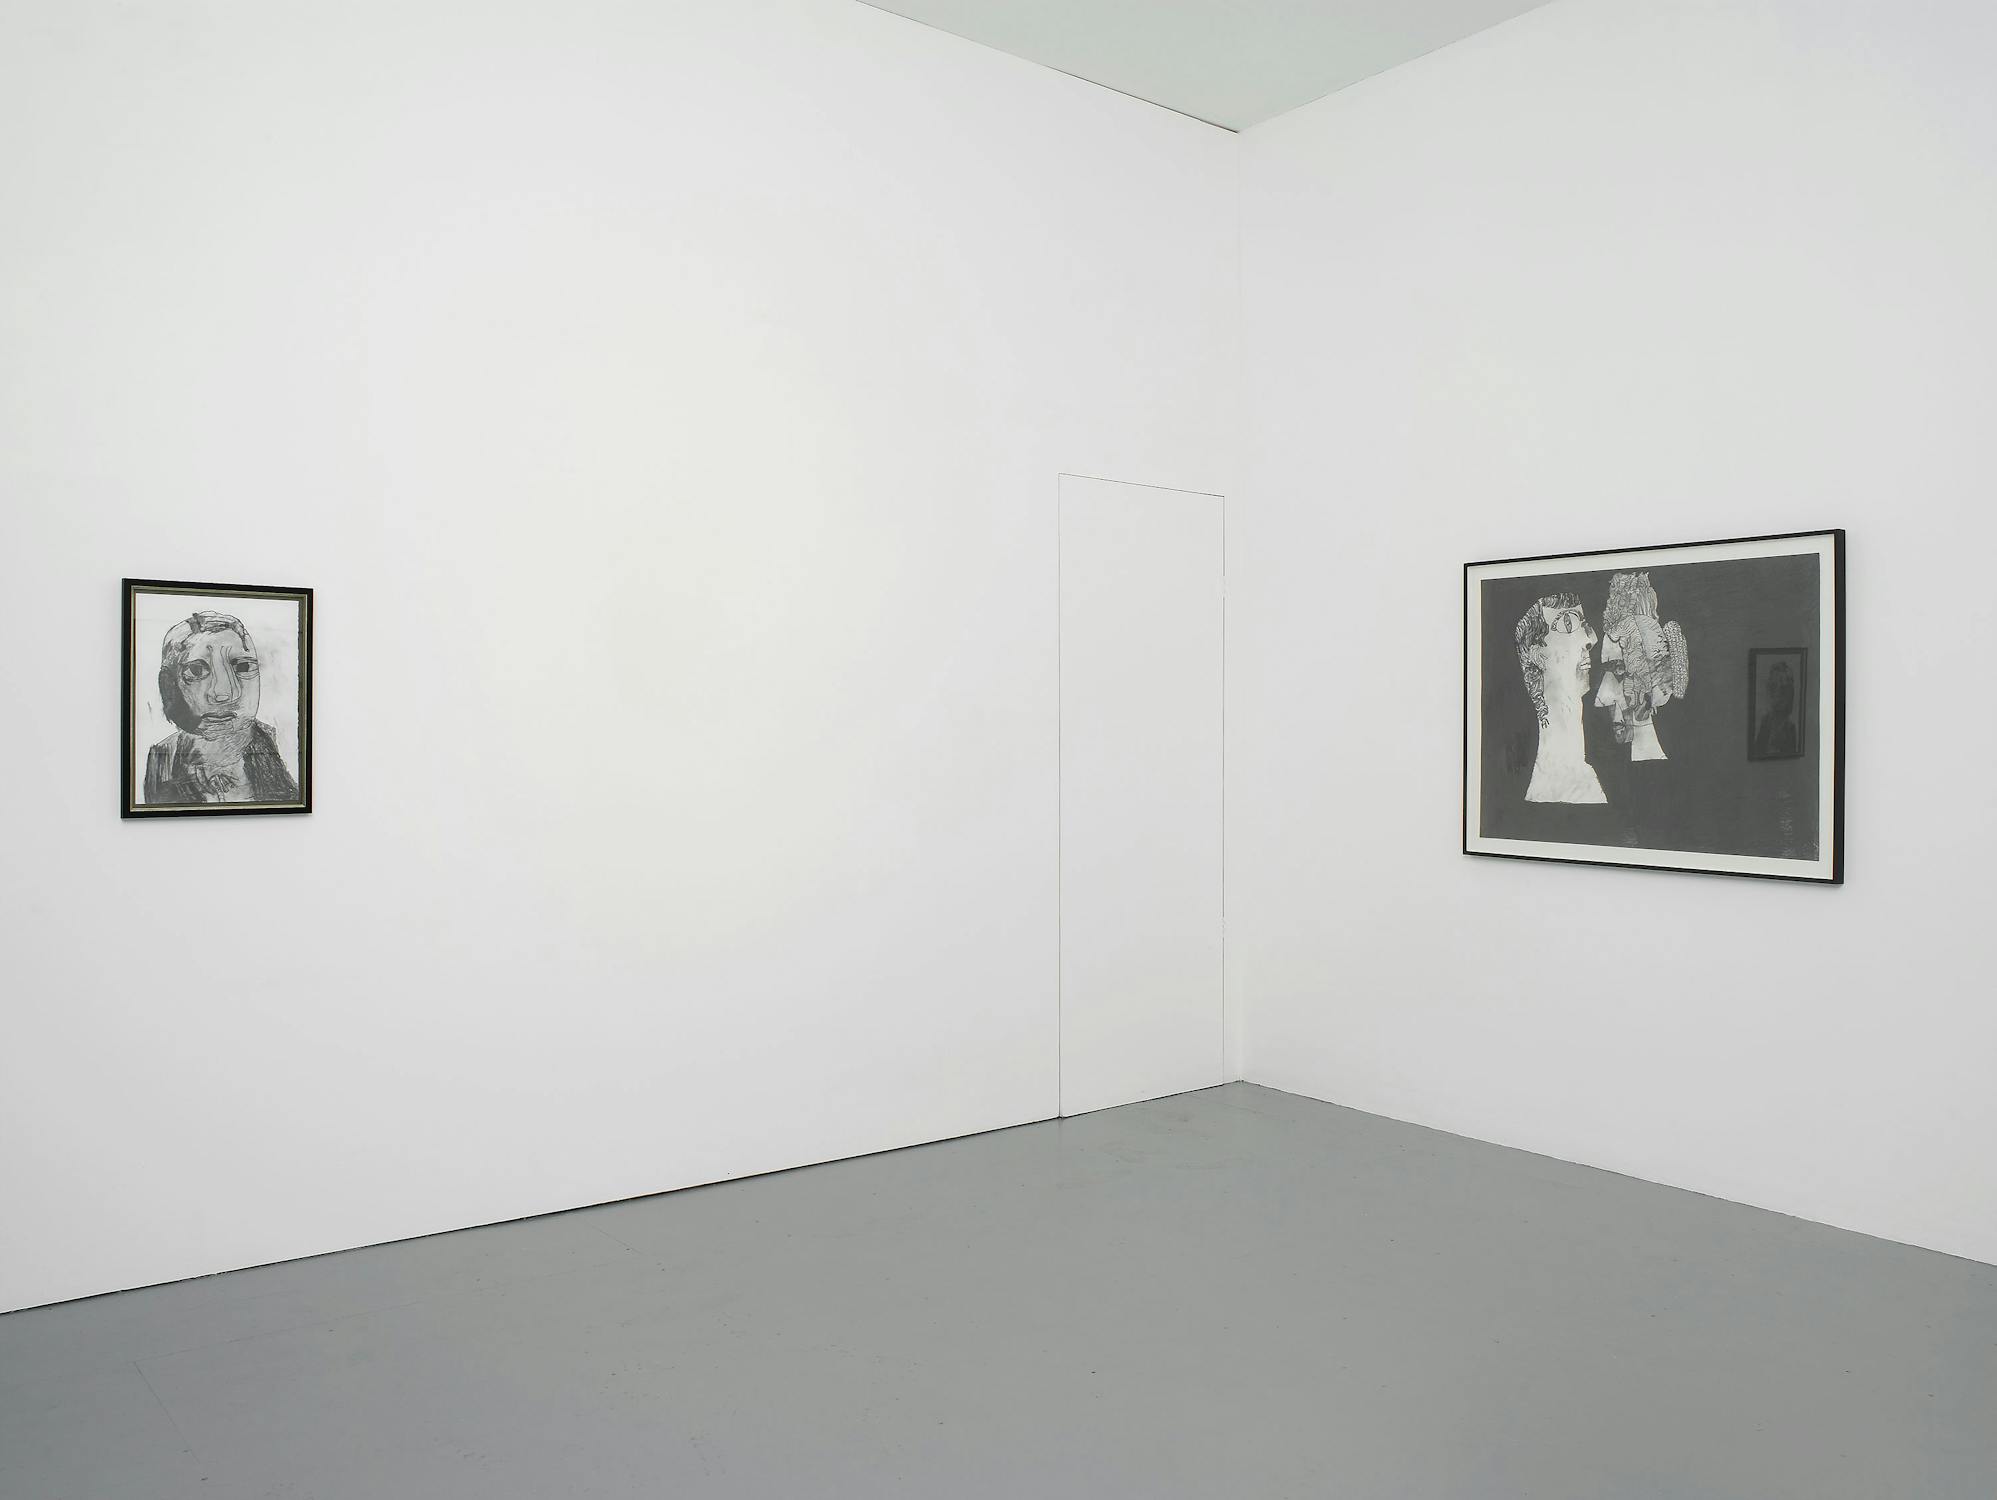 Two pencil drawings of figures with exaggerated features on white paper with black frames, hung in the corner of a white-walled gallery